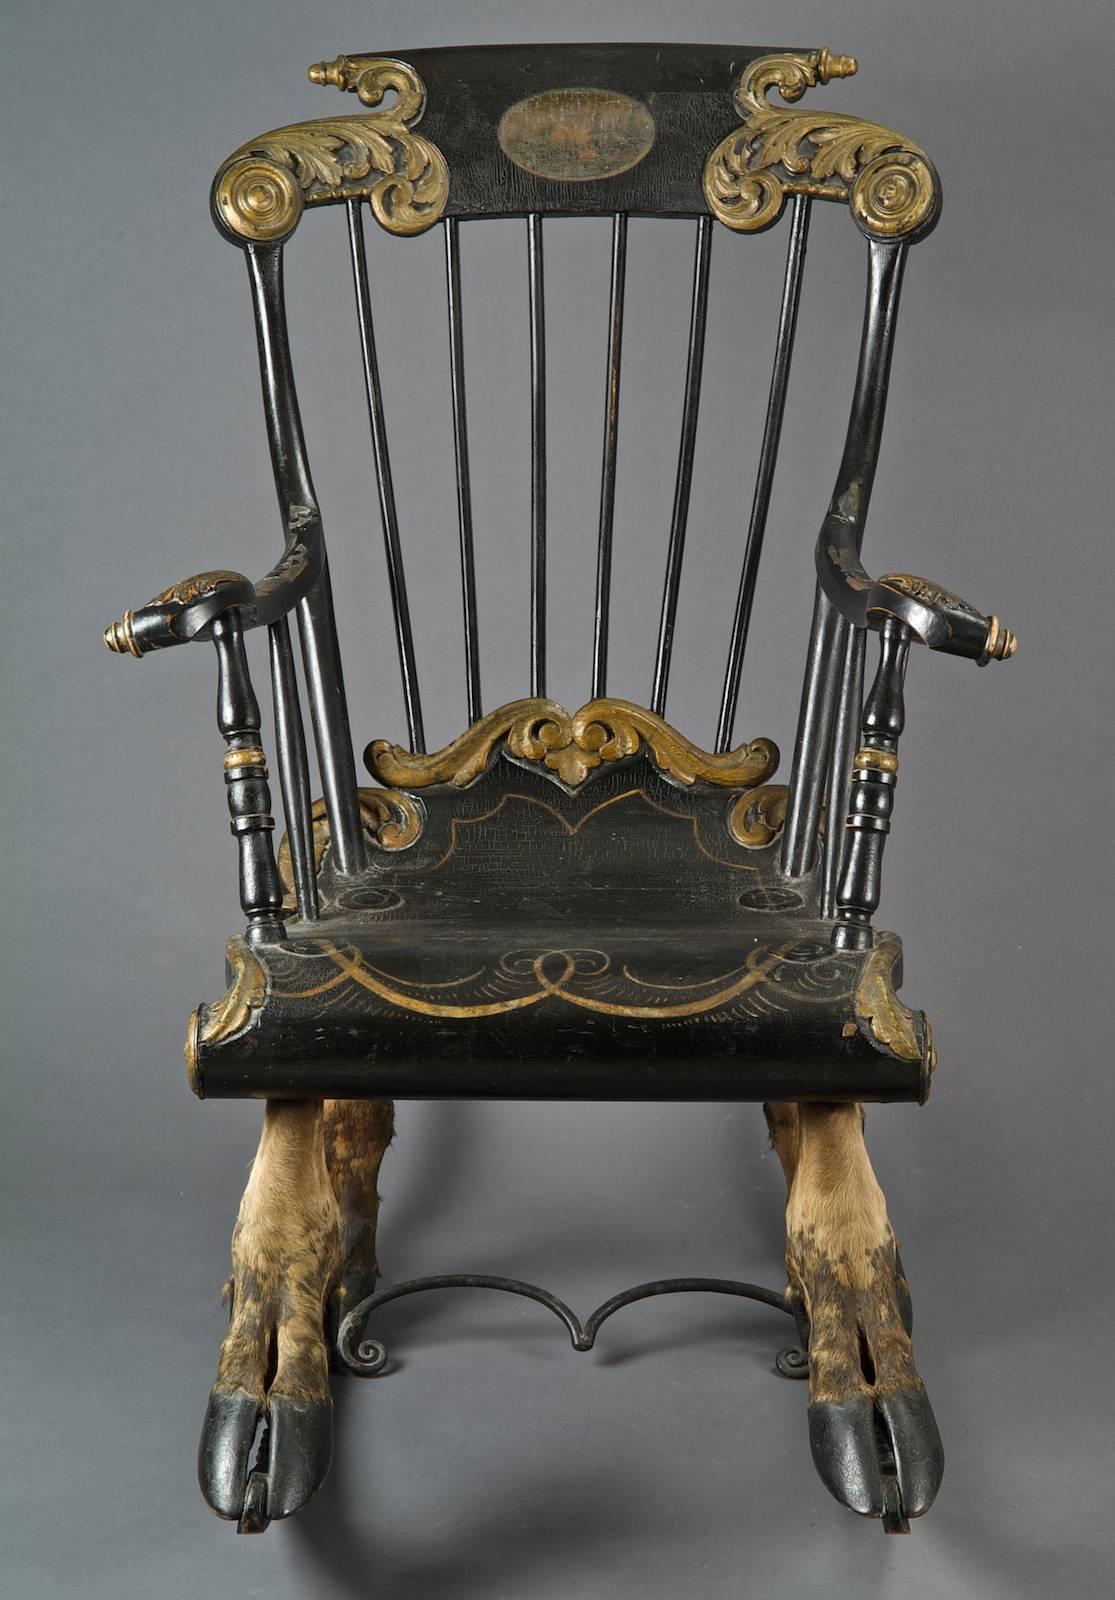 Rare rocking armchair in black and golden lacquer mounted on elk legs -bottom, armrest and back of the chair sculpted with acanthe leaves - badge on the top of the chair back - beautiful patina - Sweden, end of 17th century. 
Dimension: L 100 X L